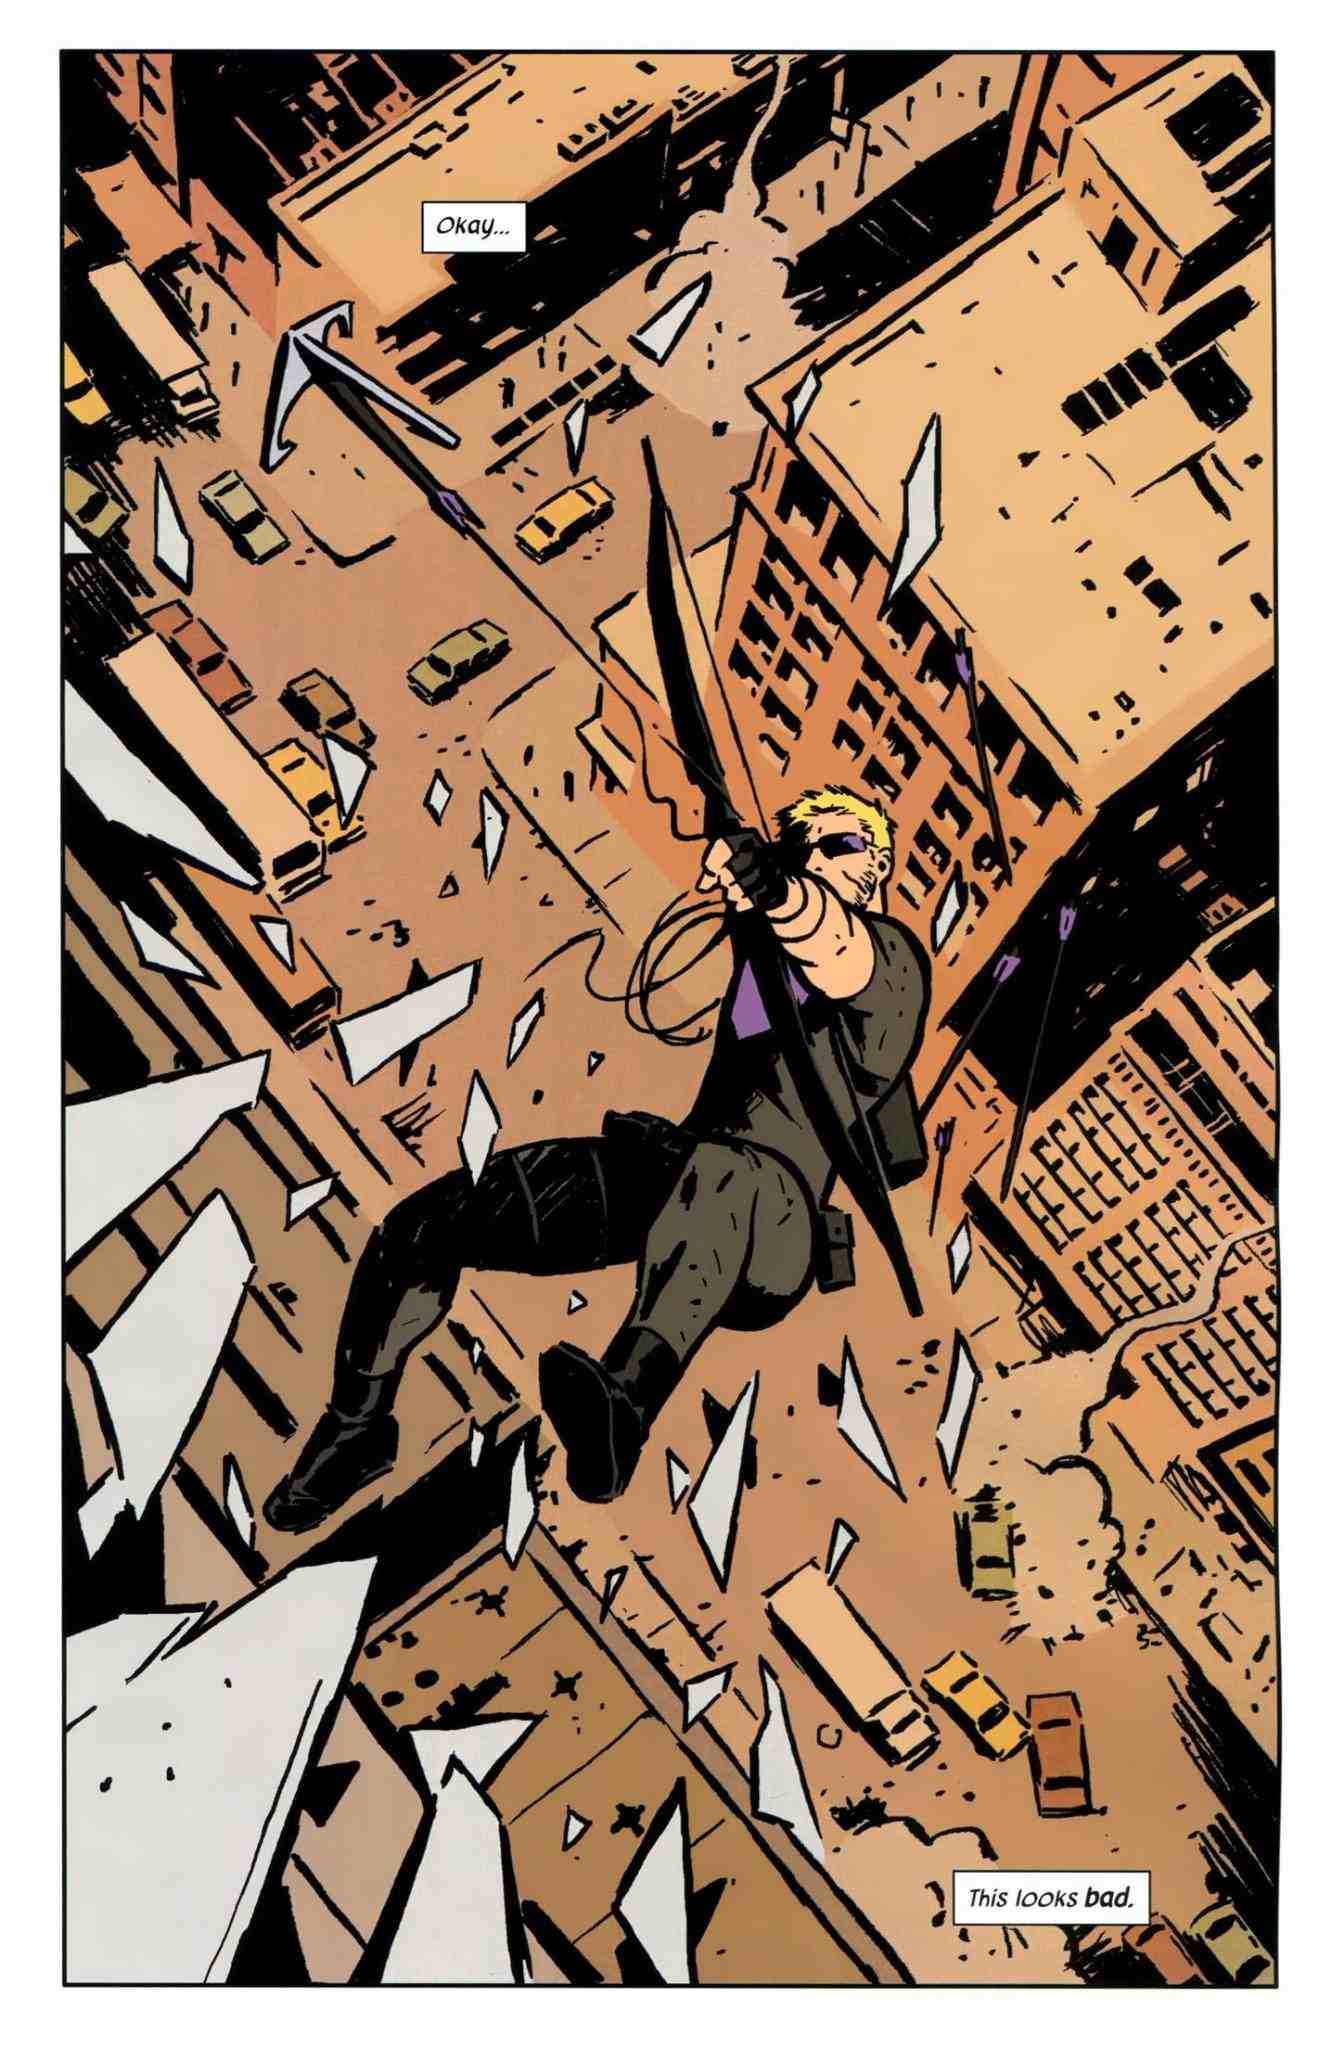 The first page of the first 2012 Hawkeye issue. We see Hawkeye falling from a building, shooting a grappling arrow vertically. The colors are mostly sepia tones.